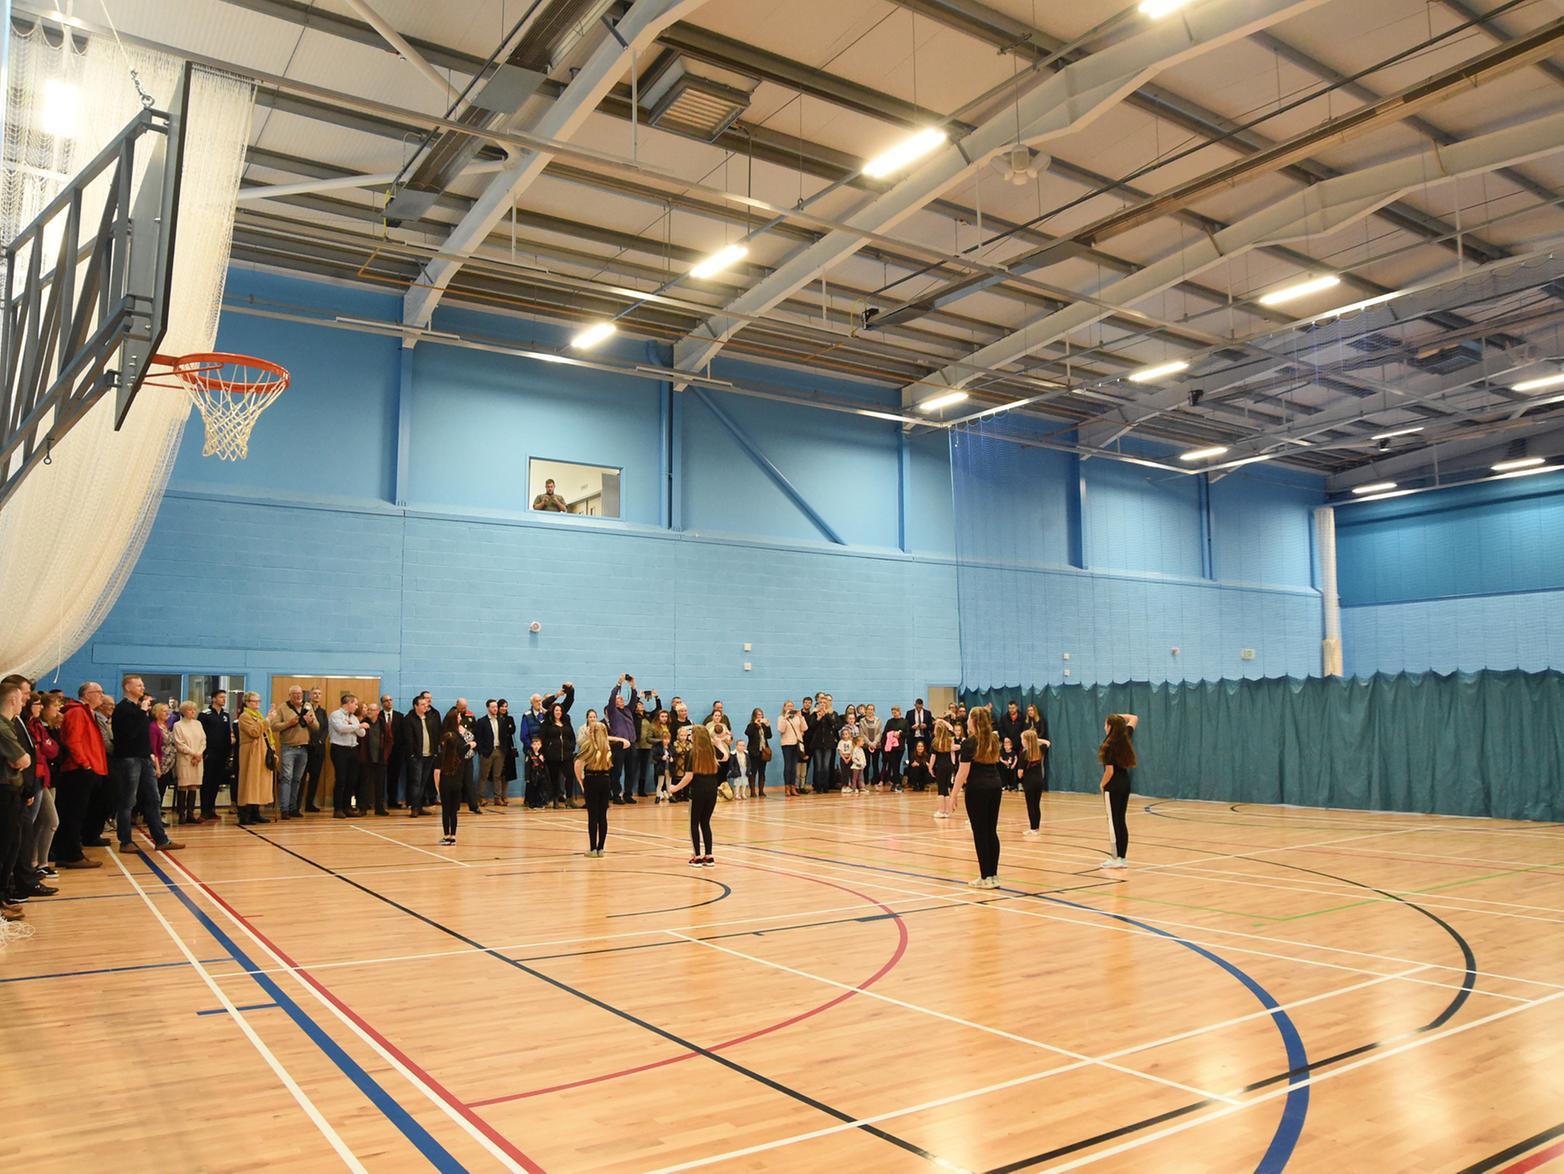 Broughton Astley Leisure Centre during the open day.